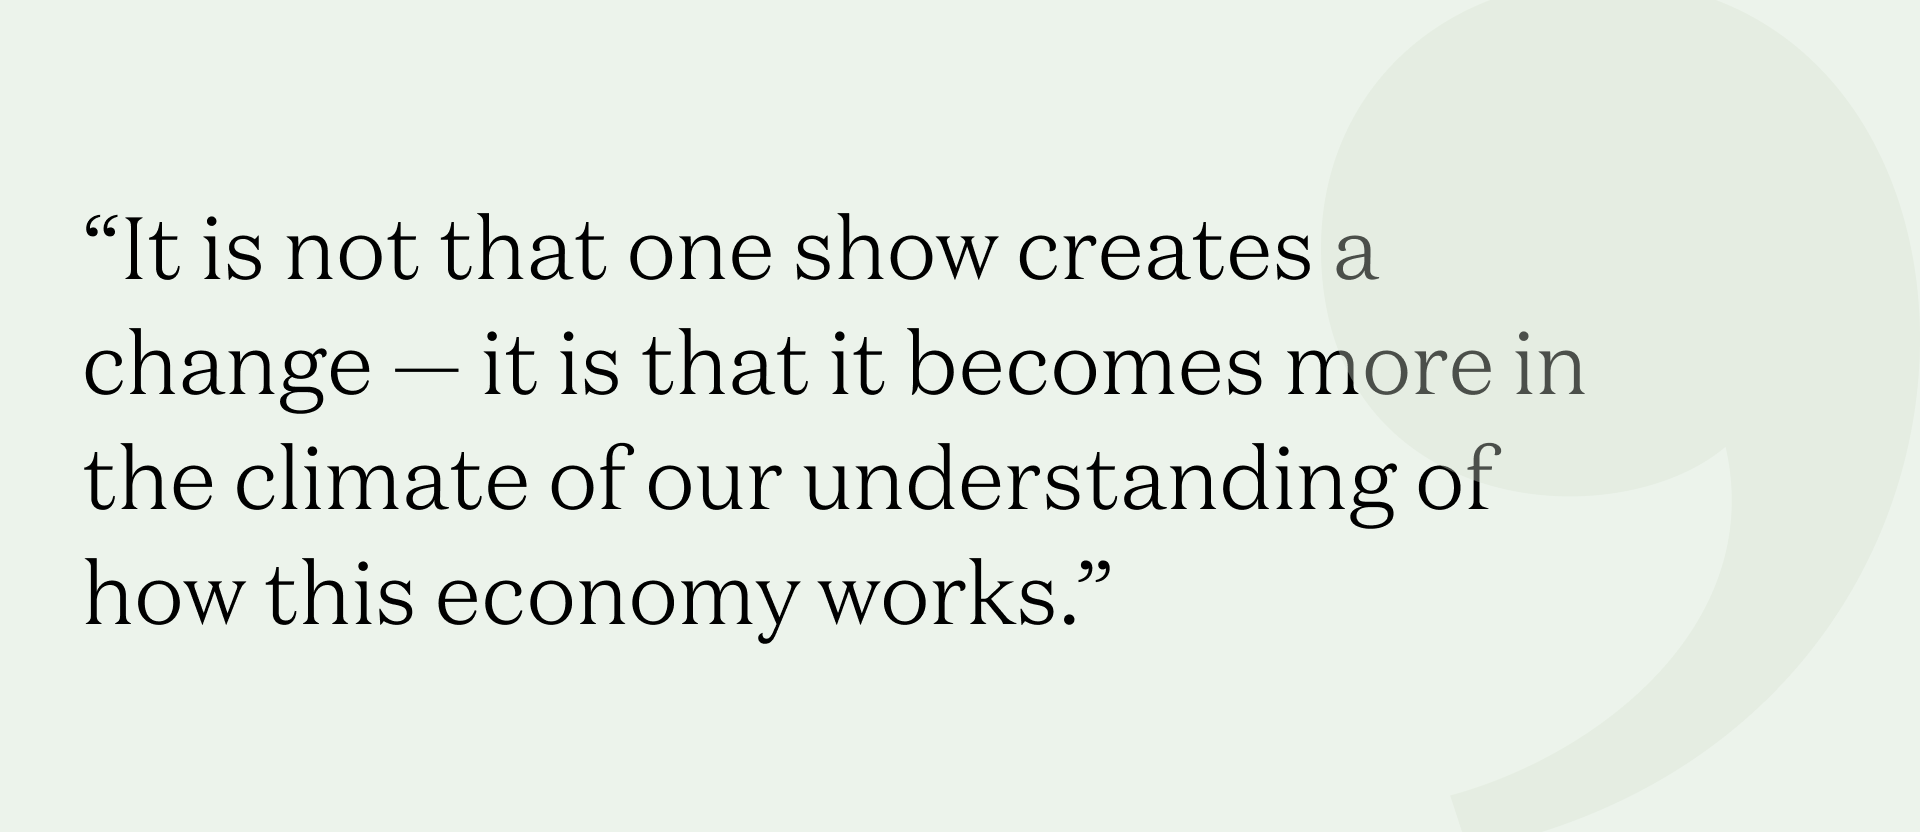 "“It is not that one show creates a change — it is that it becomes more in the climate of our understanding of how this economy works."